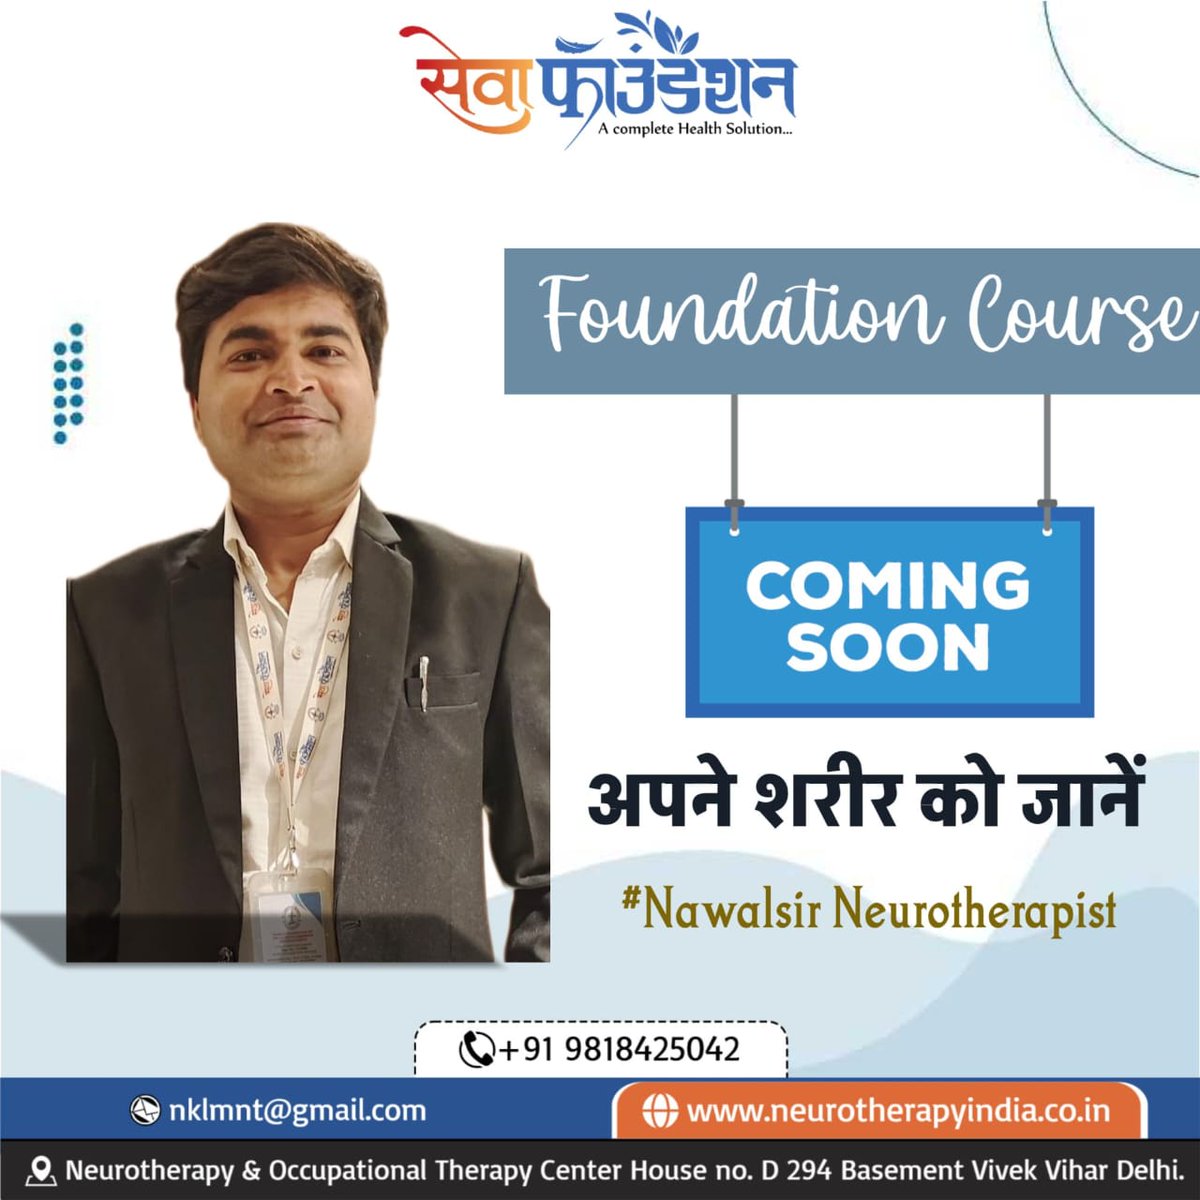 Coming Soon | Neurotherapy Foundation Course ( One Month 21 Day's  Class |  Offline or Online)
#Neurptherapy #Neurotherapyfoundationcourse
#neurotherapytraining #Neurotherapydiploma #NT

Admission Open for 2024 New July Diploma Batch 
Neurotherapy Professional Course for Your